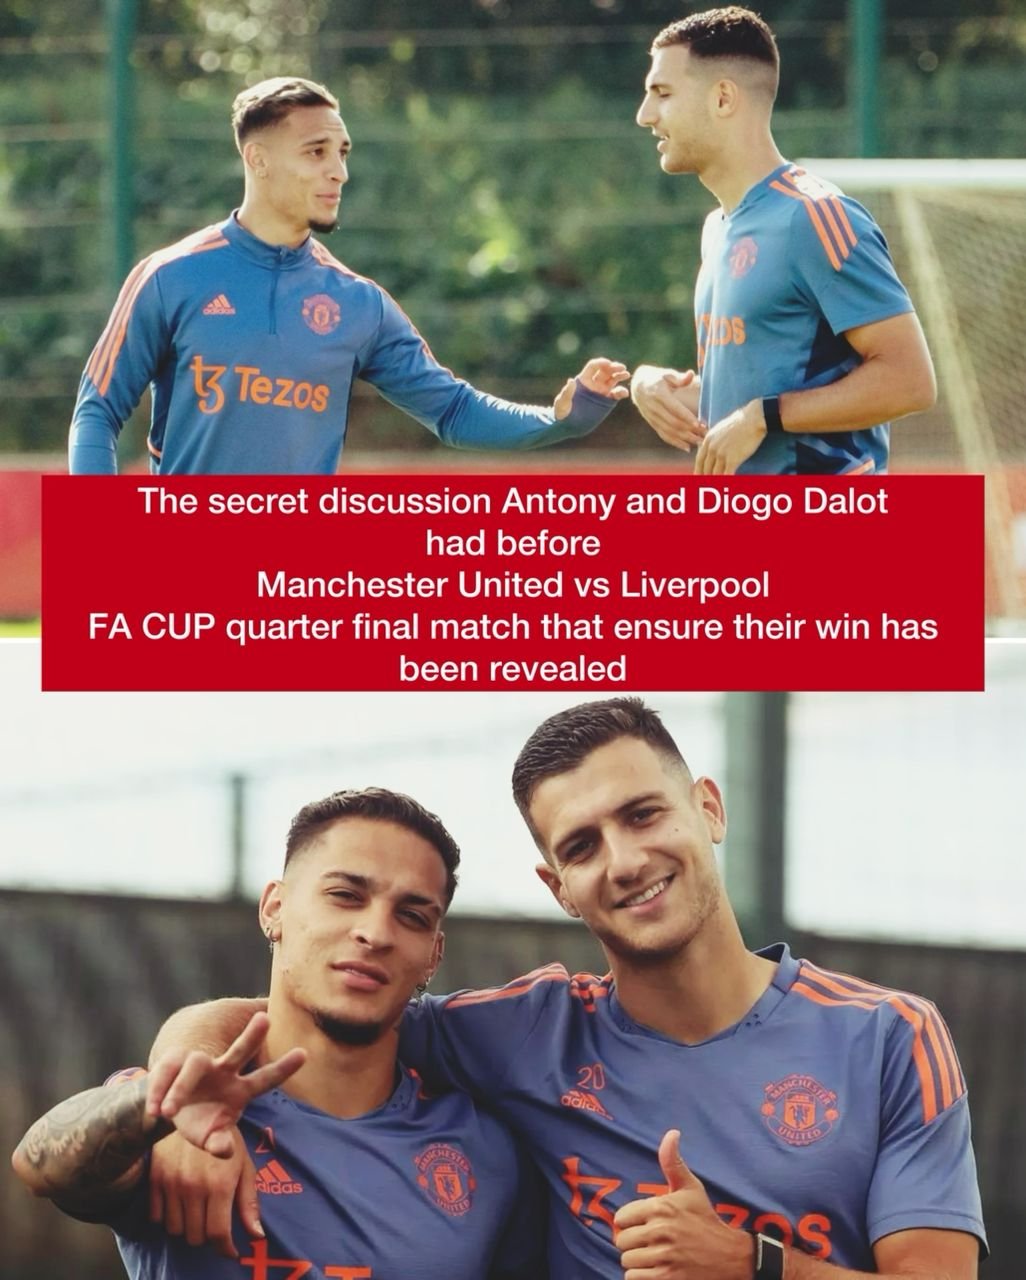 The secret discussion Antony and Diogo Dalot had before Manchester United vs Liverpool FA CUP quarter final match that ensure their win has been revealed